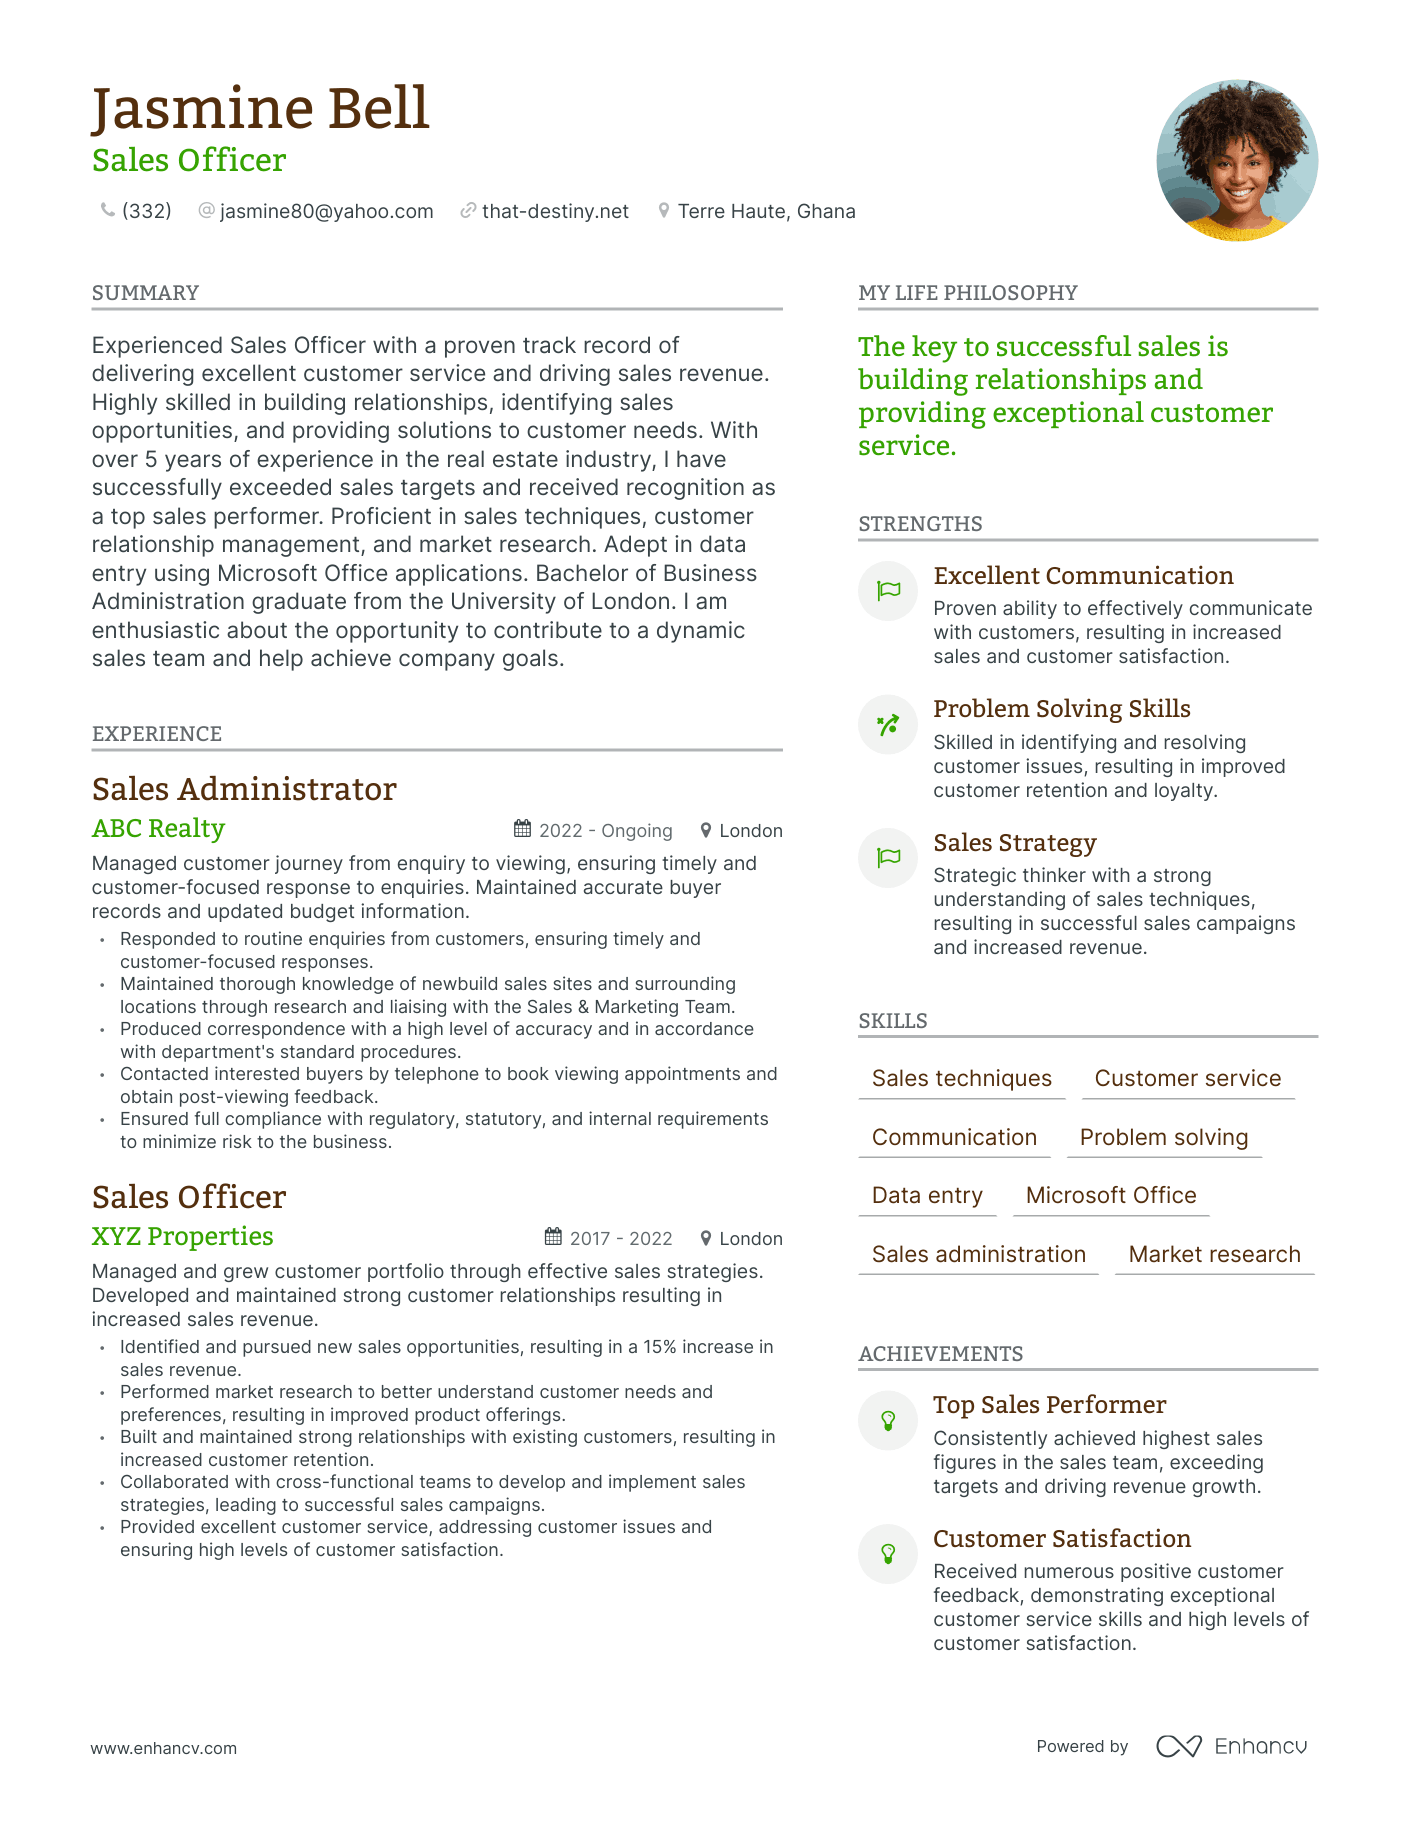 Sales Officer resume example